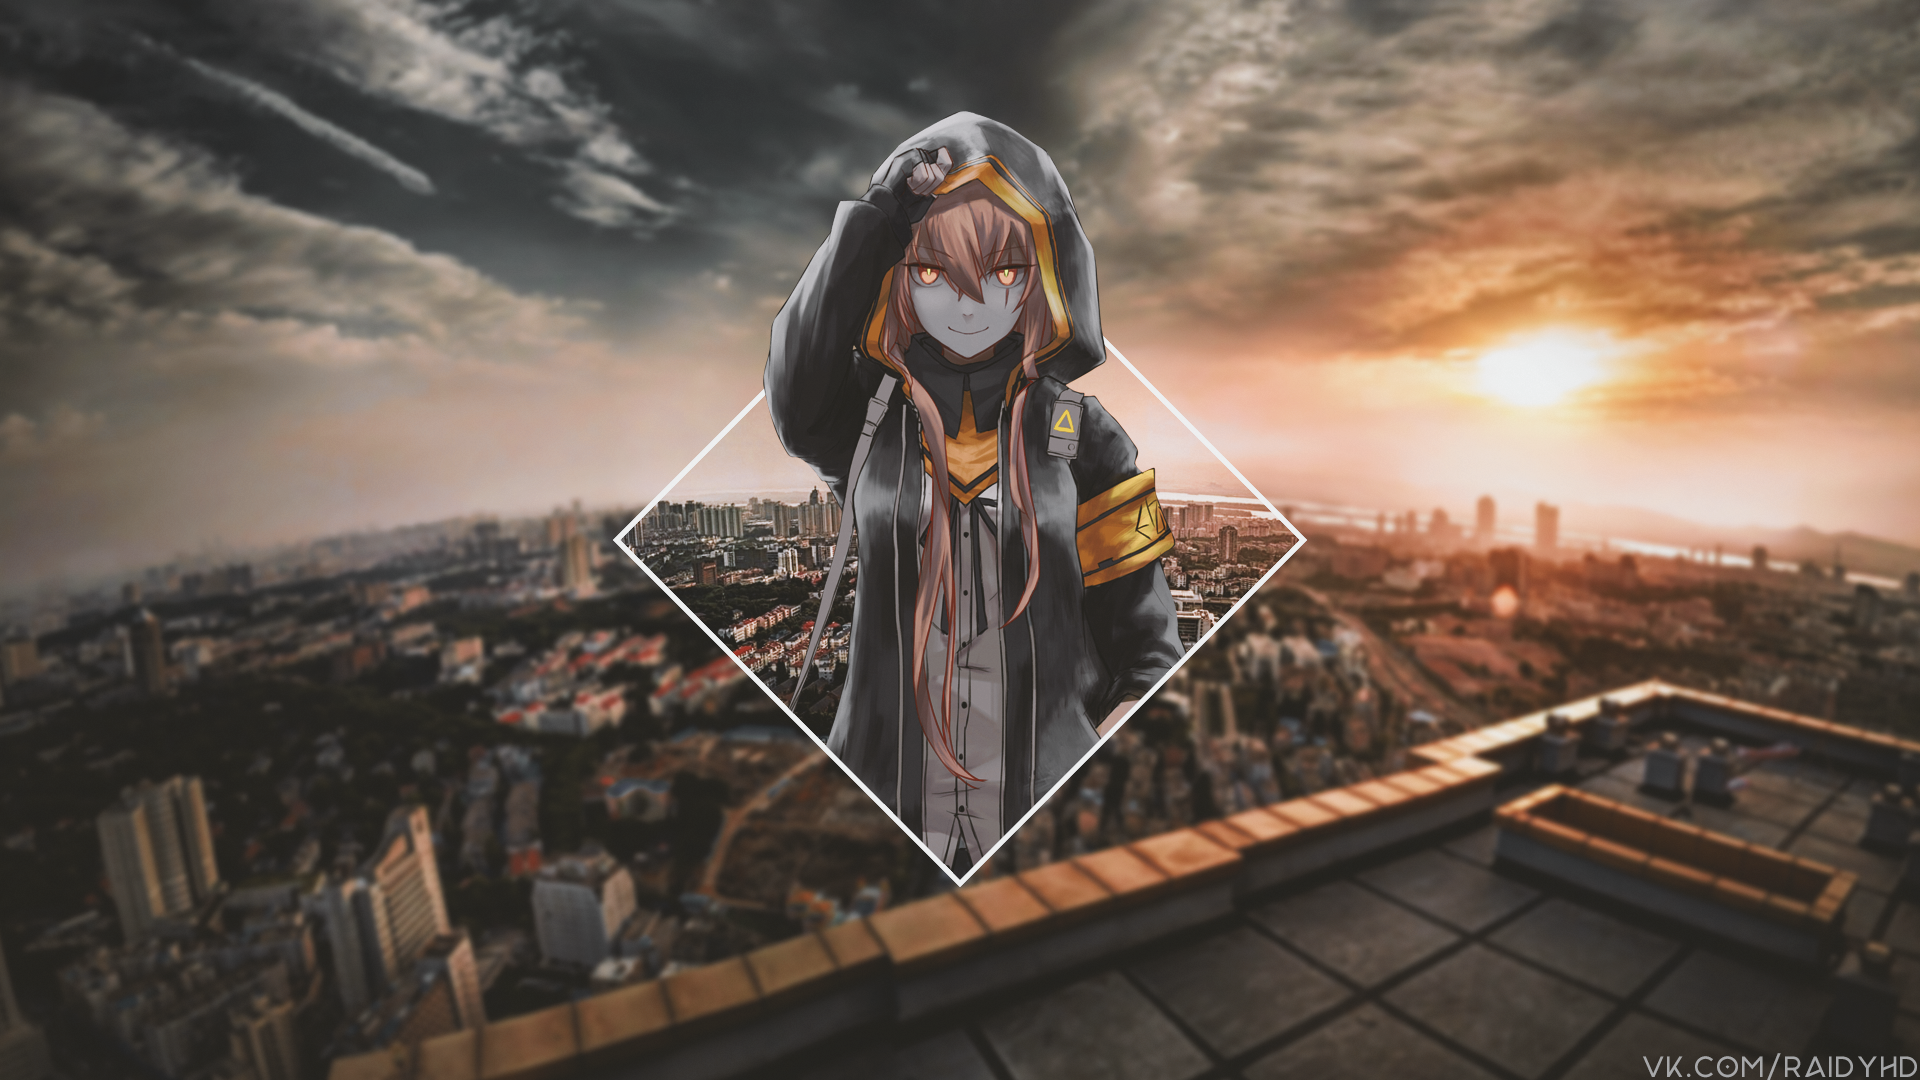 Anime 1920x1080 anime anime girls picture-in-picture Girls Frontline watermarked